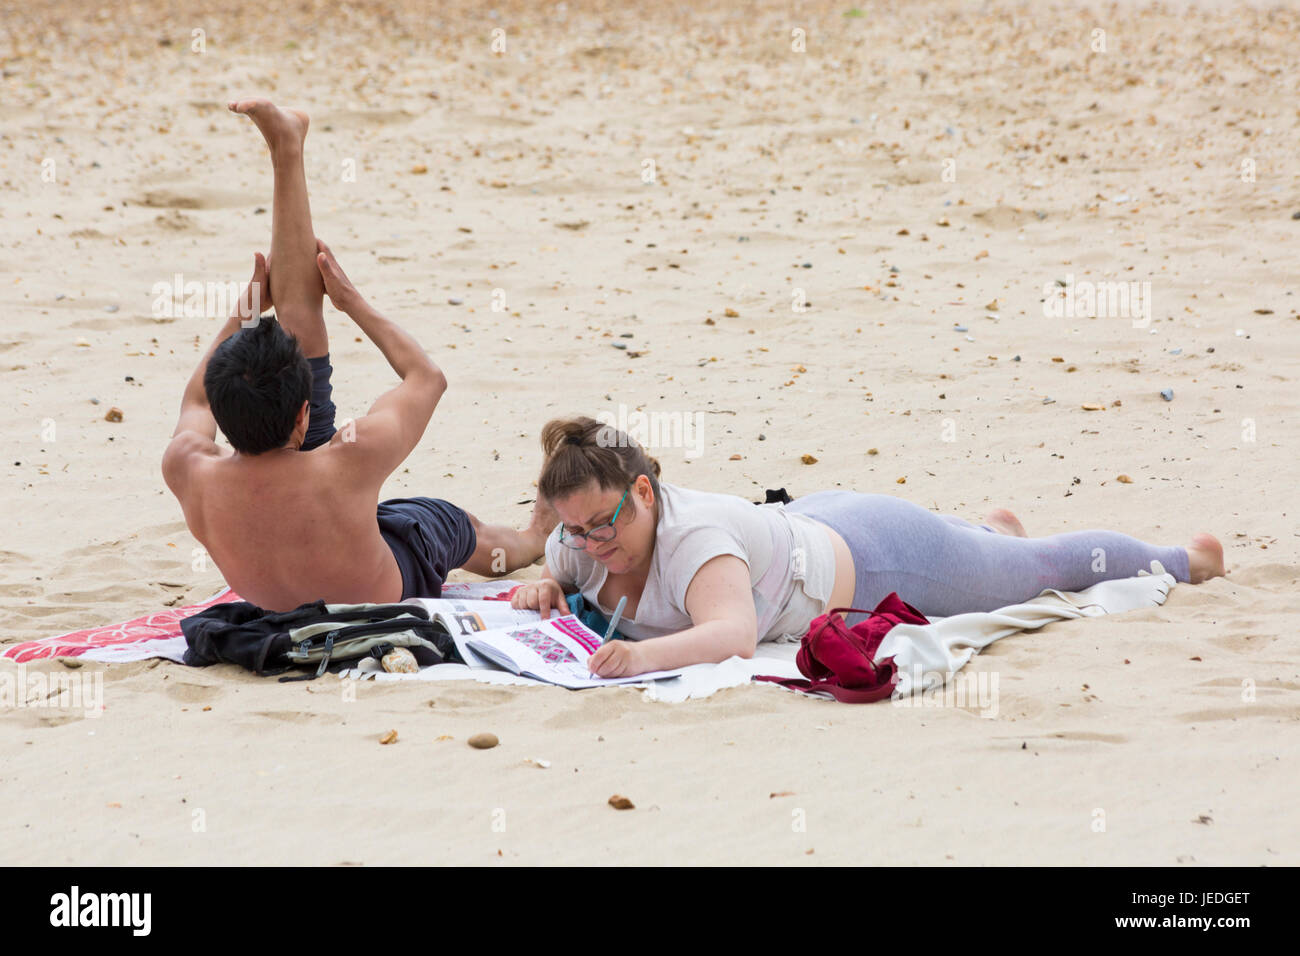 Bournemouth, Dorset, UK. 24th June, 2017. UK weather: overcast day with cooling breeze and sunny spells, as visitors head to the seaside. Couple on the beach, woman looking at magazine book, man doing exercises. Credit: Carolyn Jenkins/Alamy Live News Stock Photo